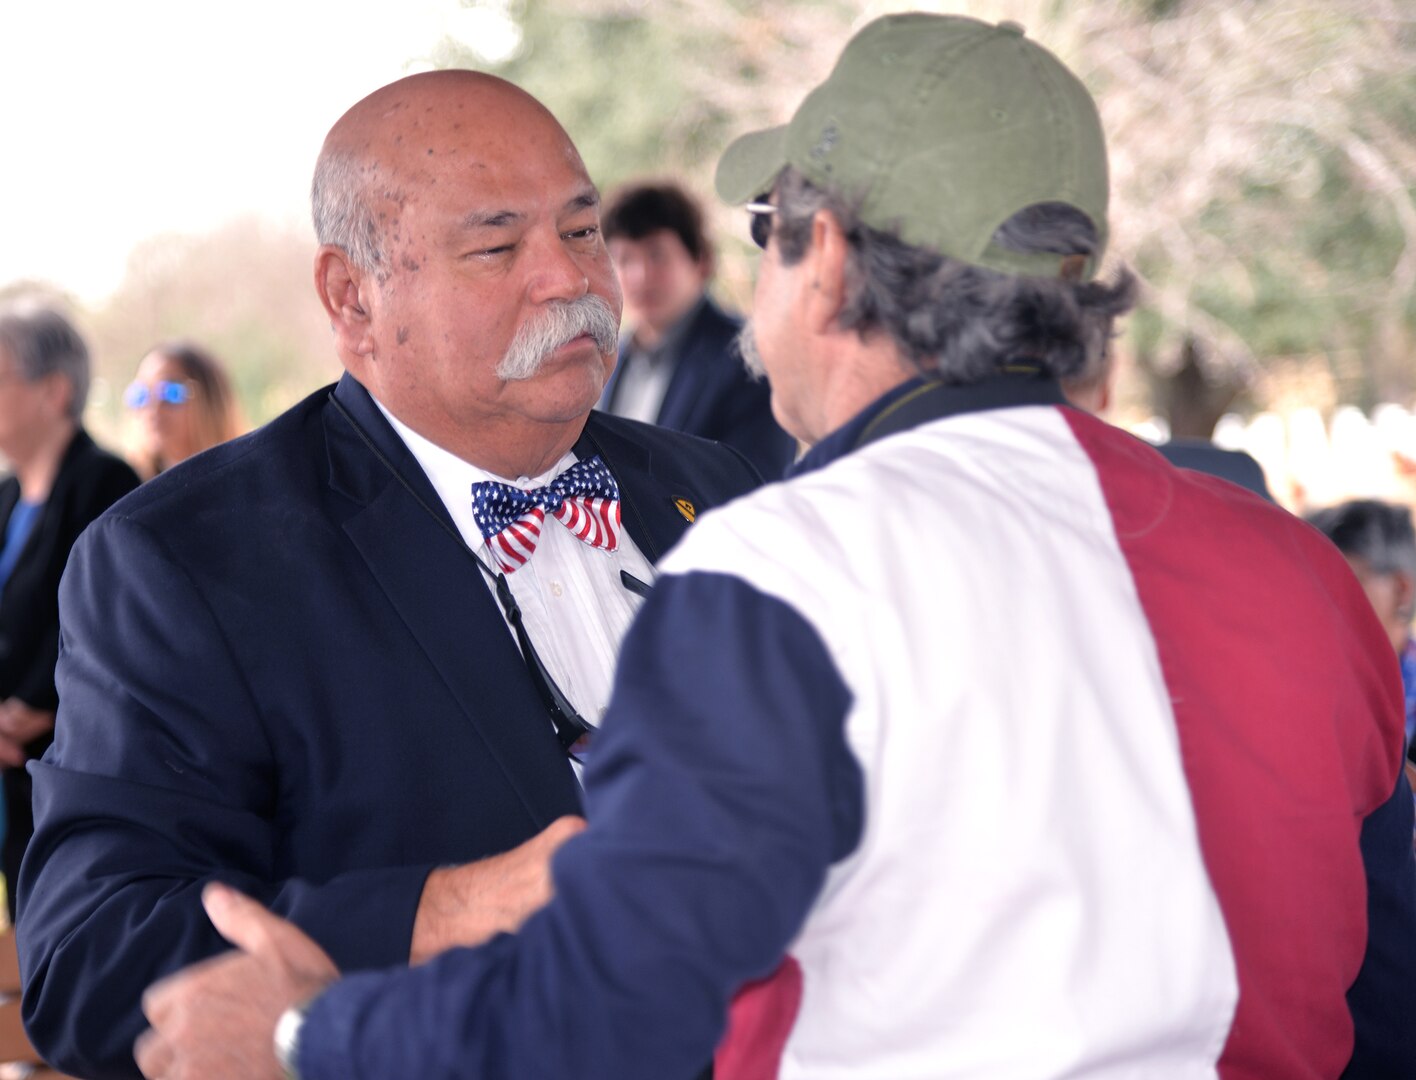 Gregorio Patlan Torres (left), the brother of Cpl. Luis Patlan Torres, who was interred at Fort Sam Houston National Cemetery Jan. 13 after being missing in action since 1950, greets fellow Fort Sam Houston Memorial Services Detachment Honor Guard member Johnny Hubbs. Gregorio, now 71, is a Vietnam War veteran.